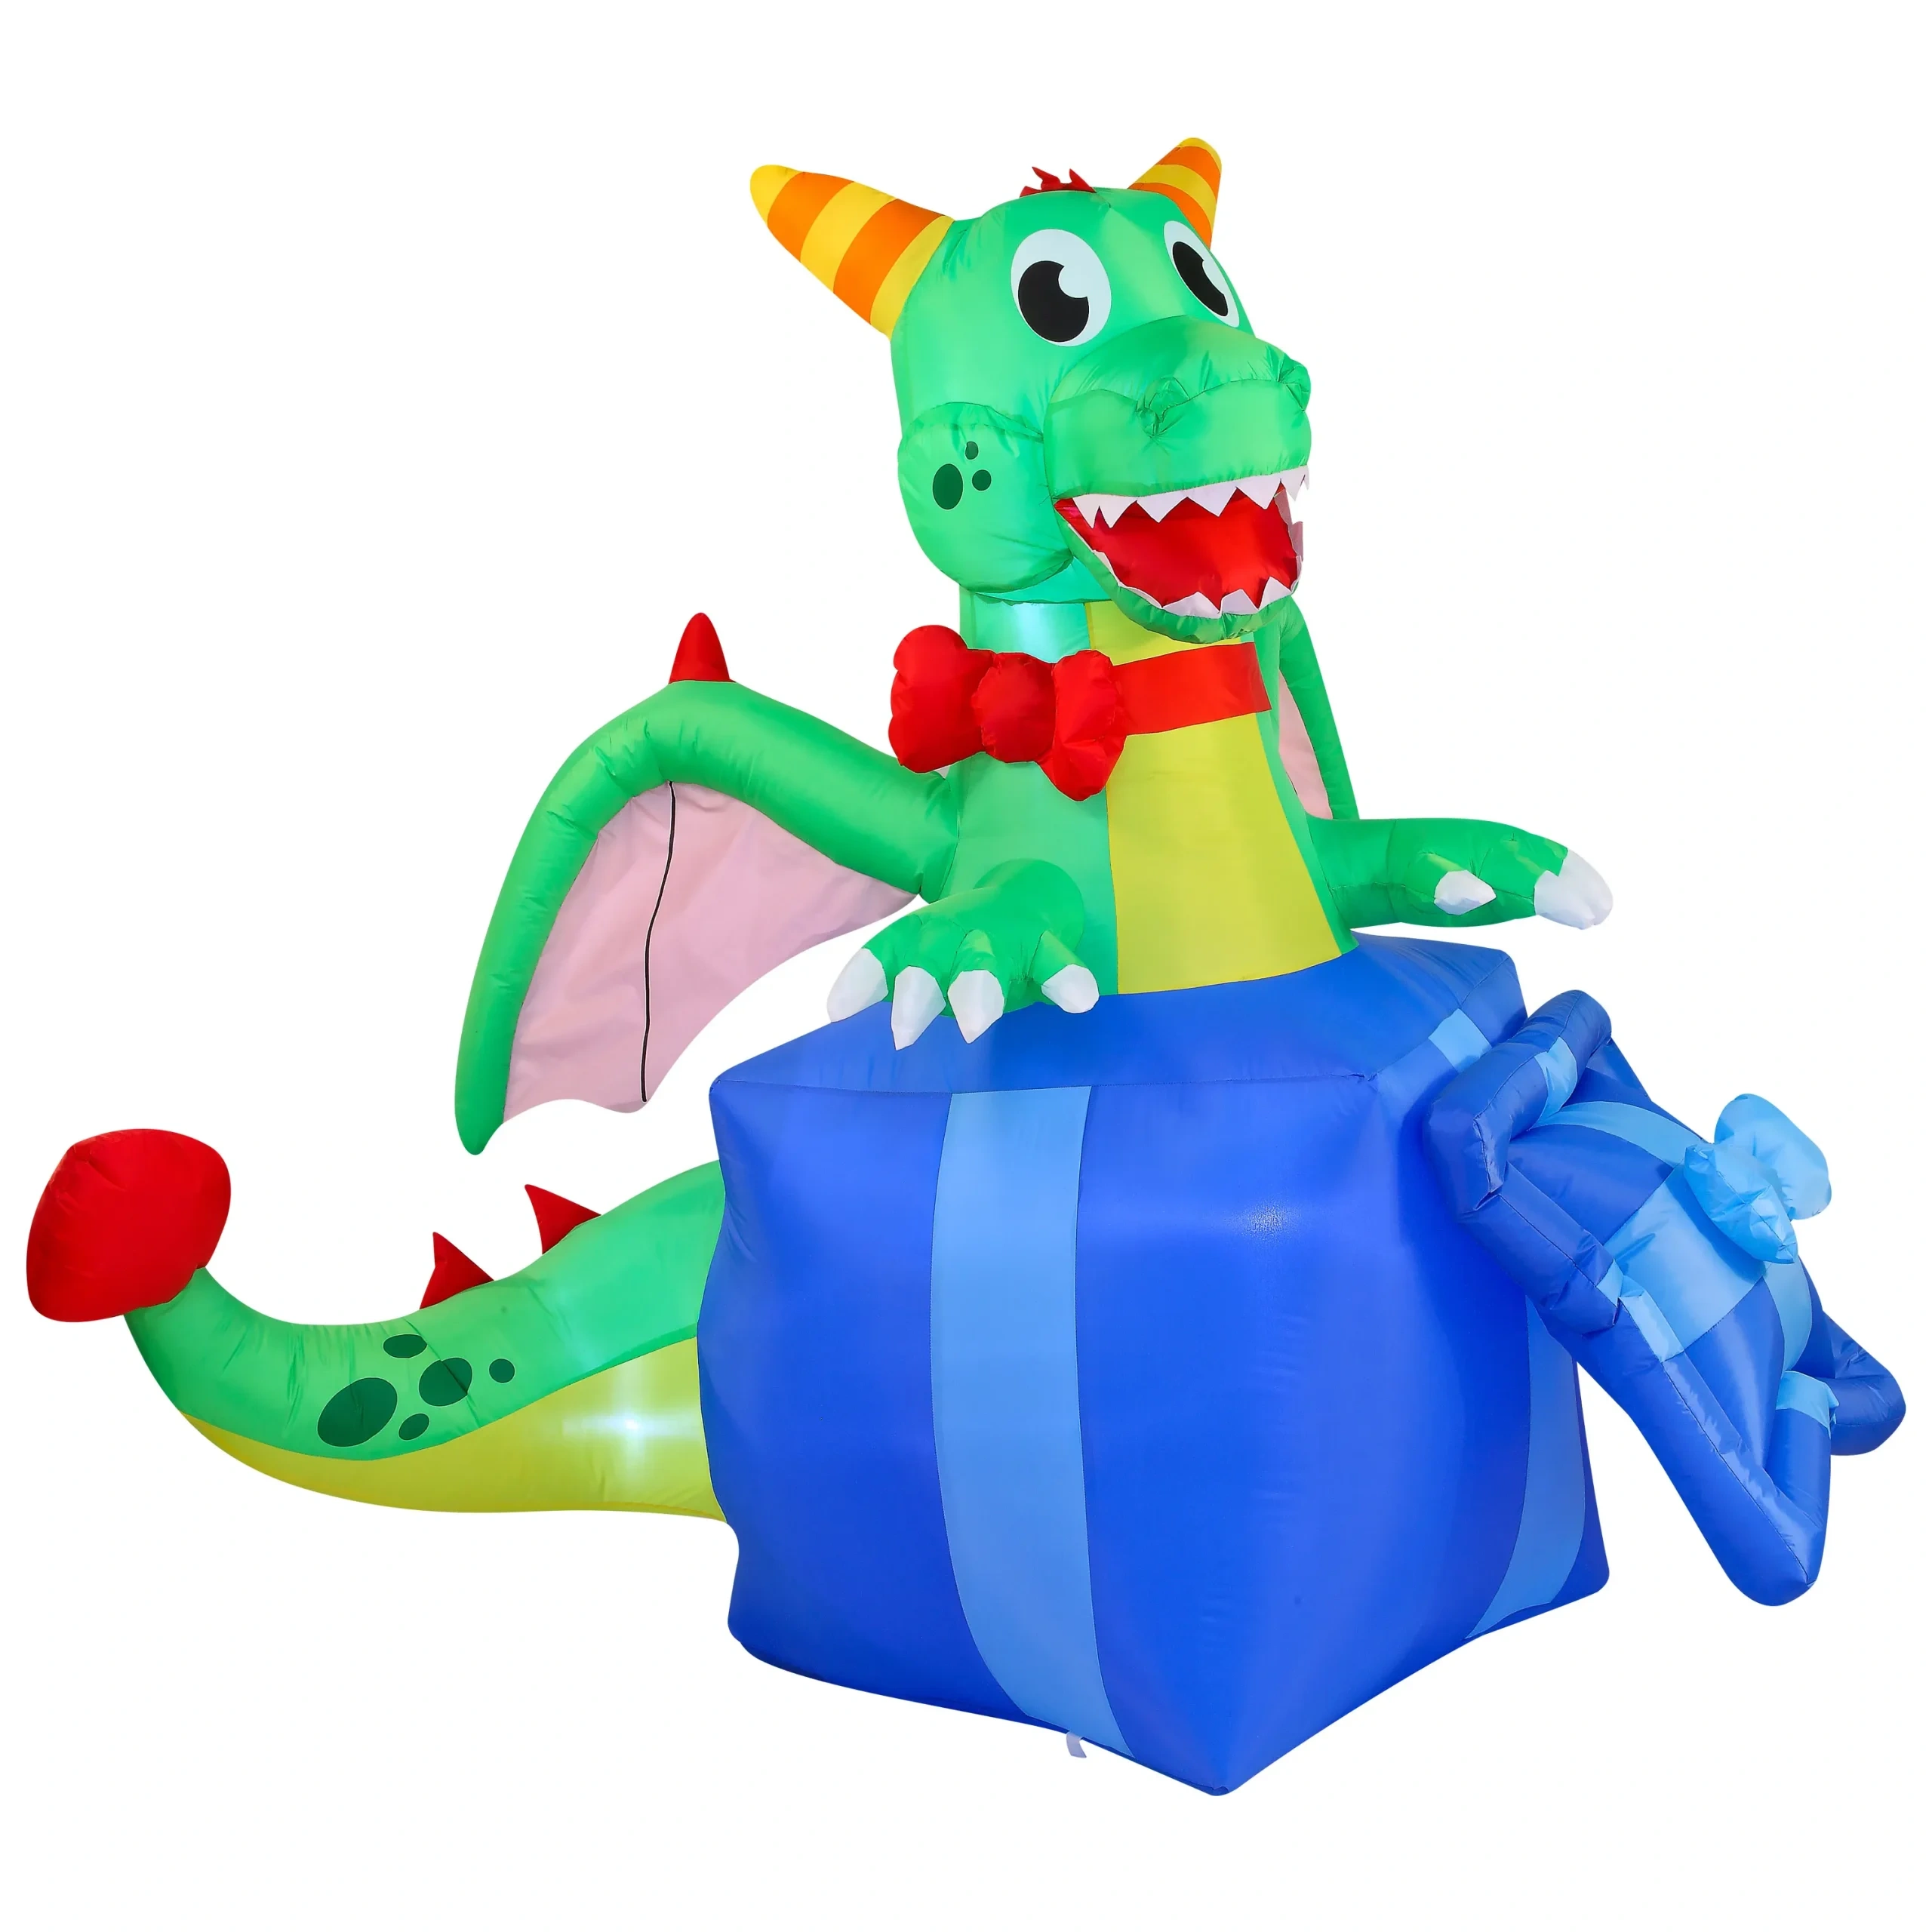 6ft Christmas Inflatable Dragon in A Gift Box